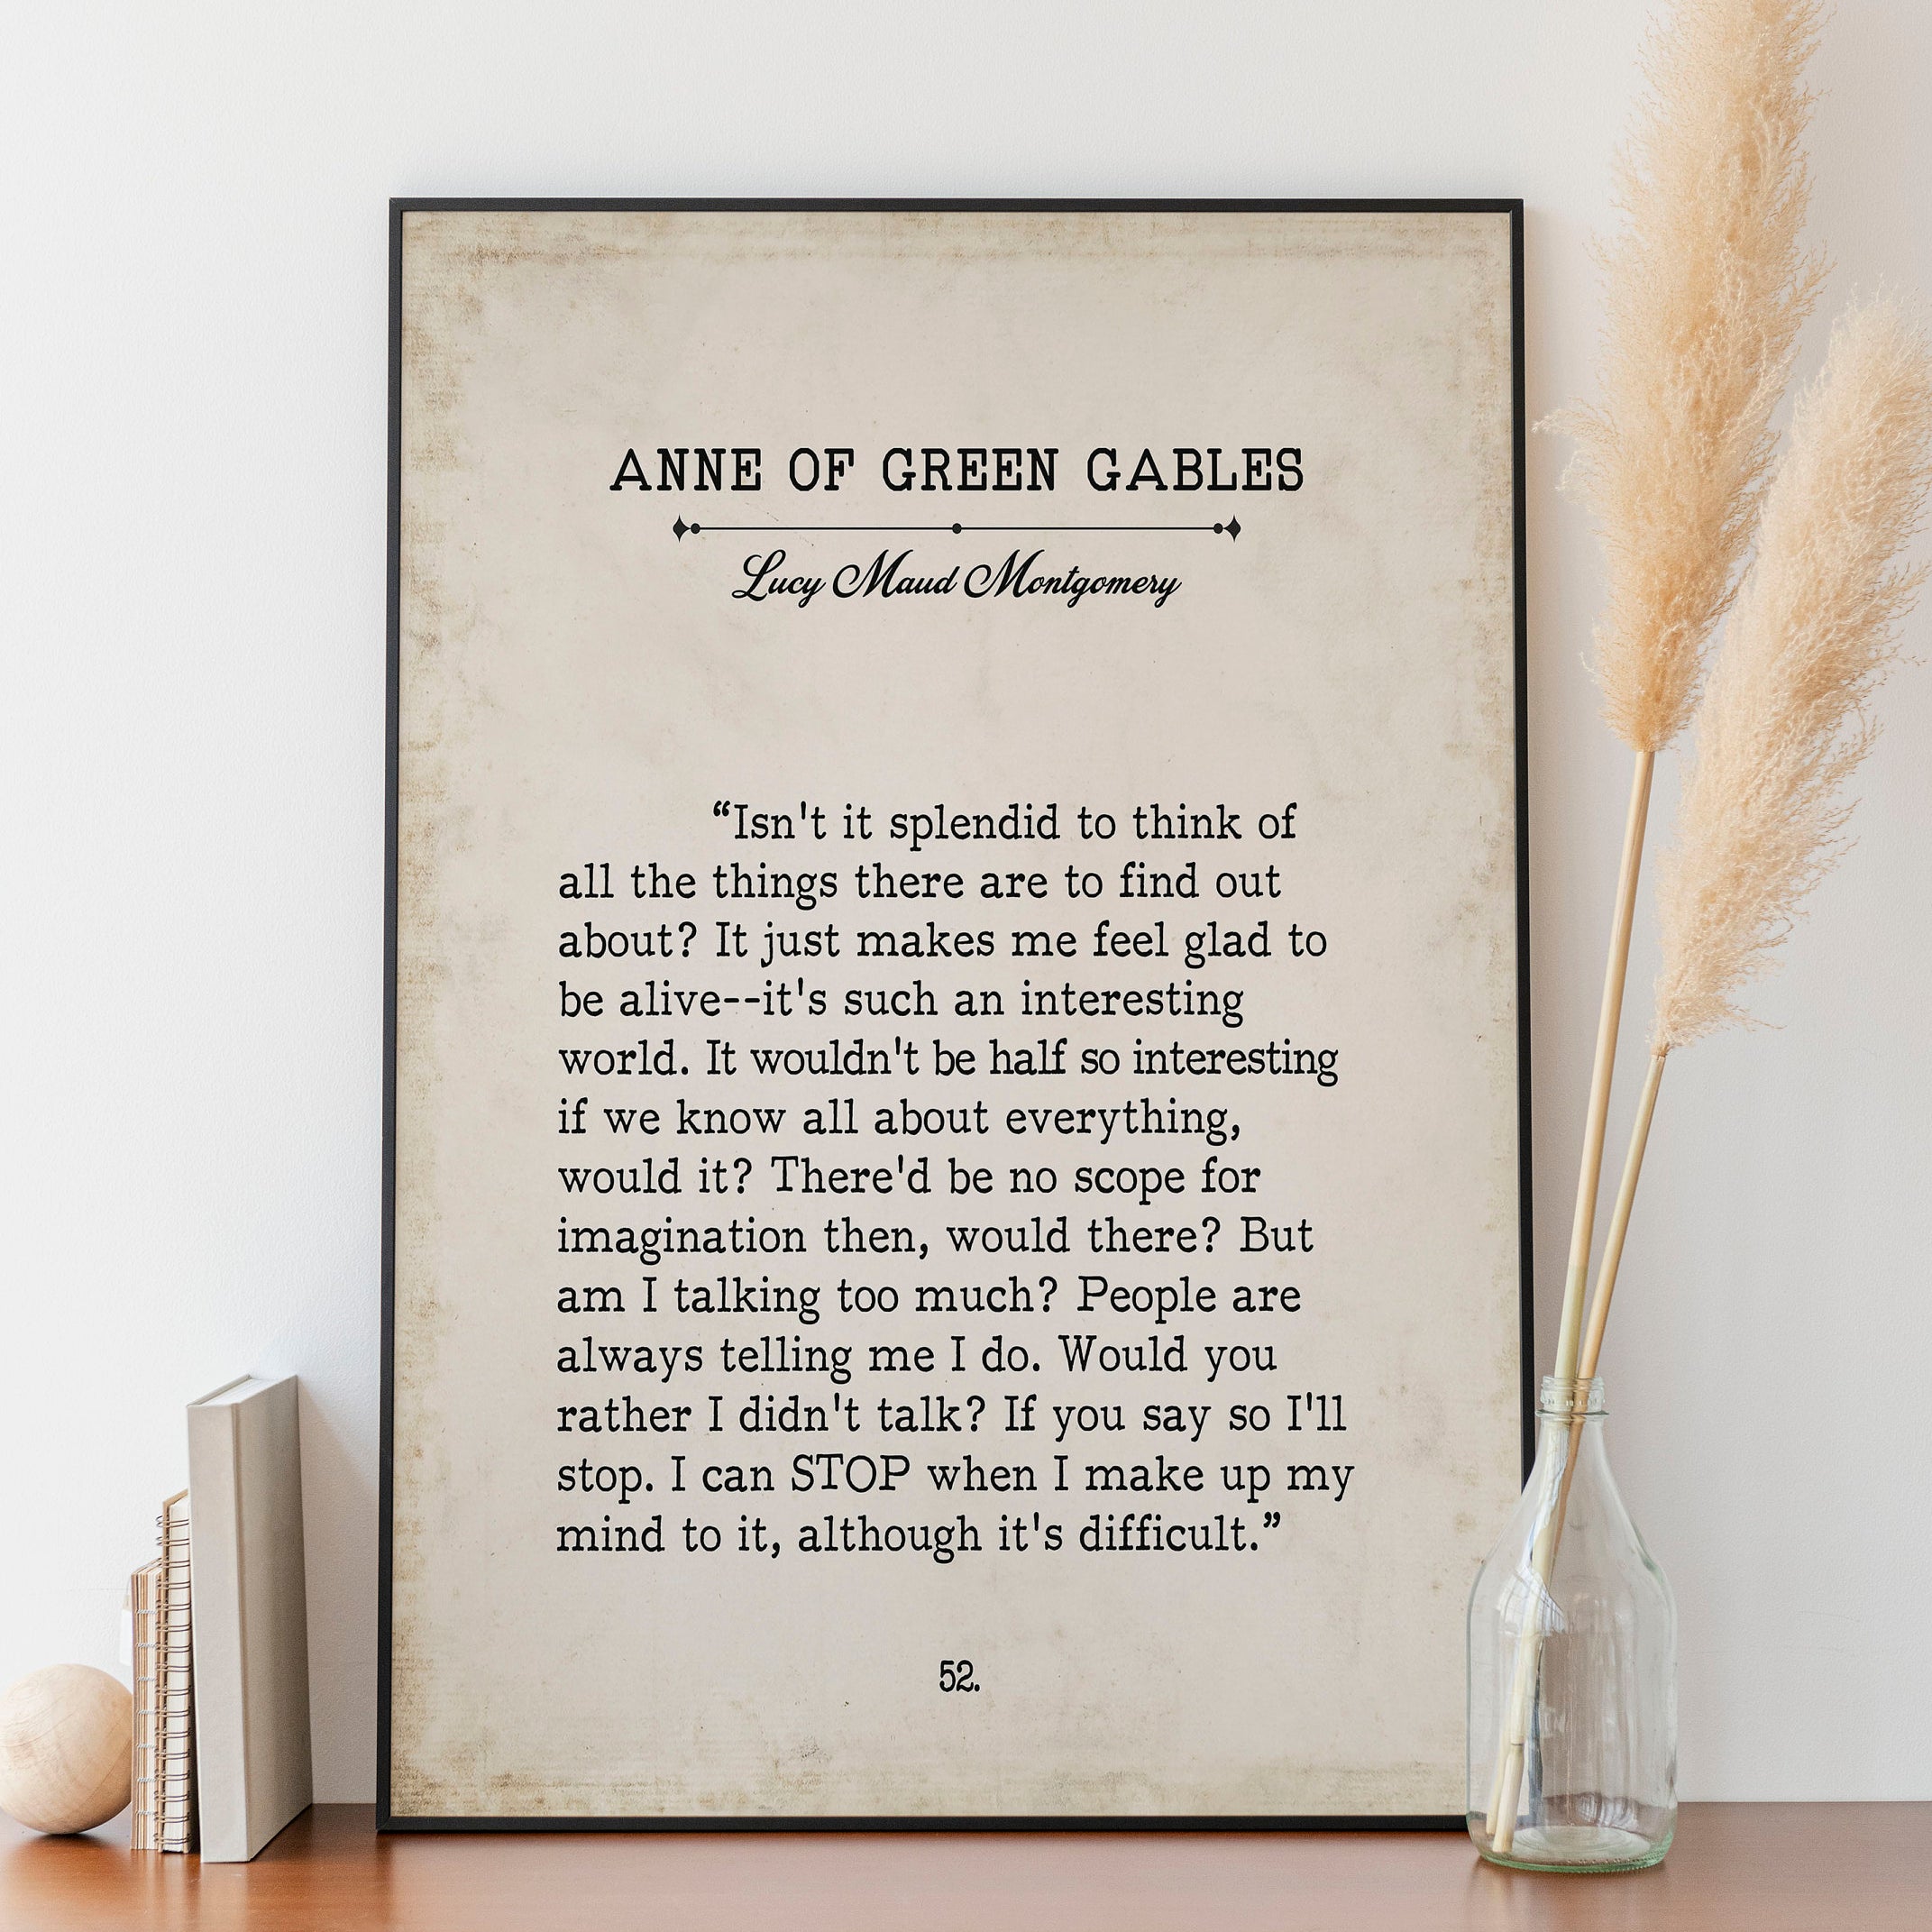 L M Montgomery Book Page Inspirational Wall Art, Anne of Green Gables Quote Vintage Style Print Wall Decor